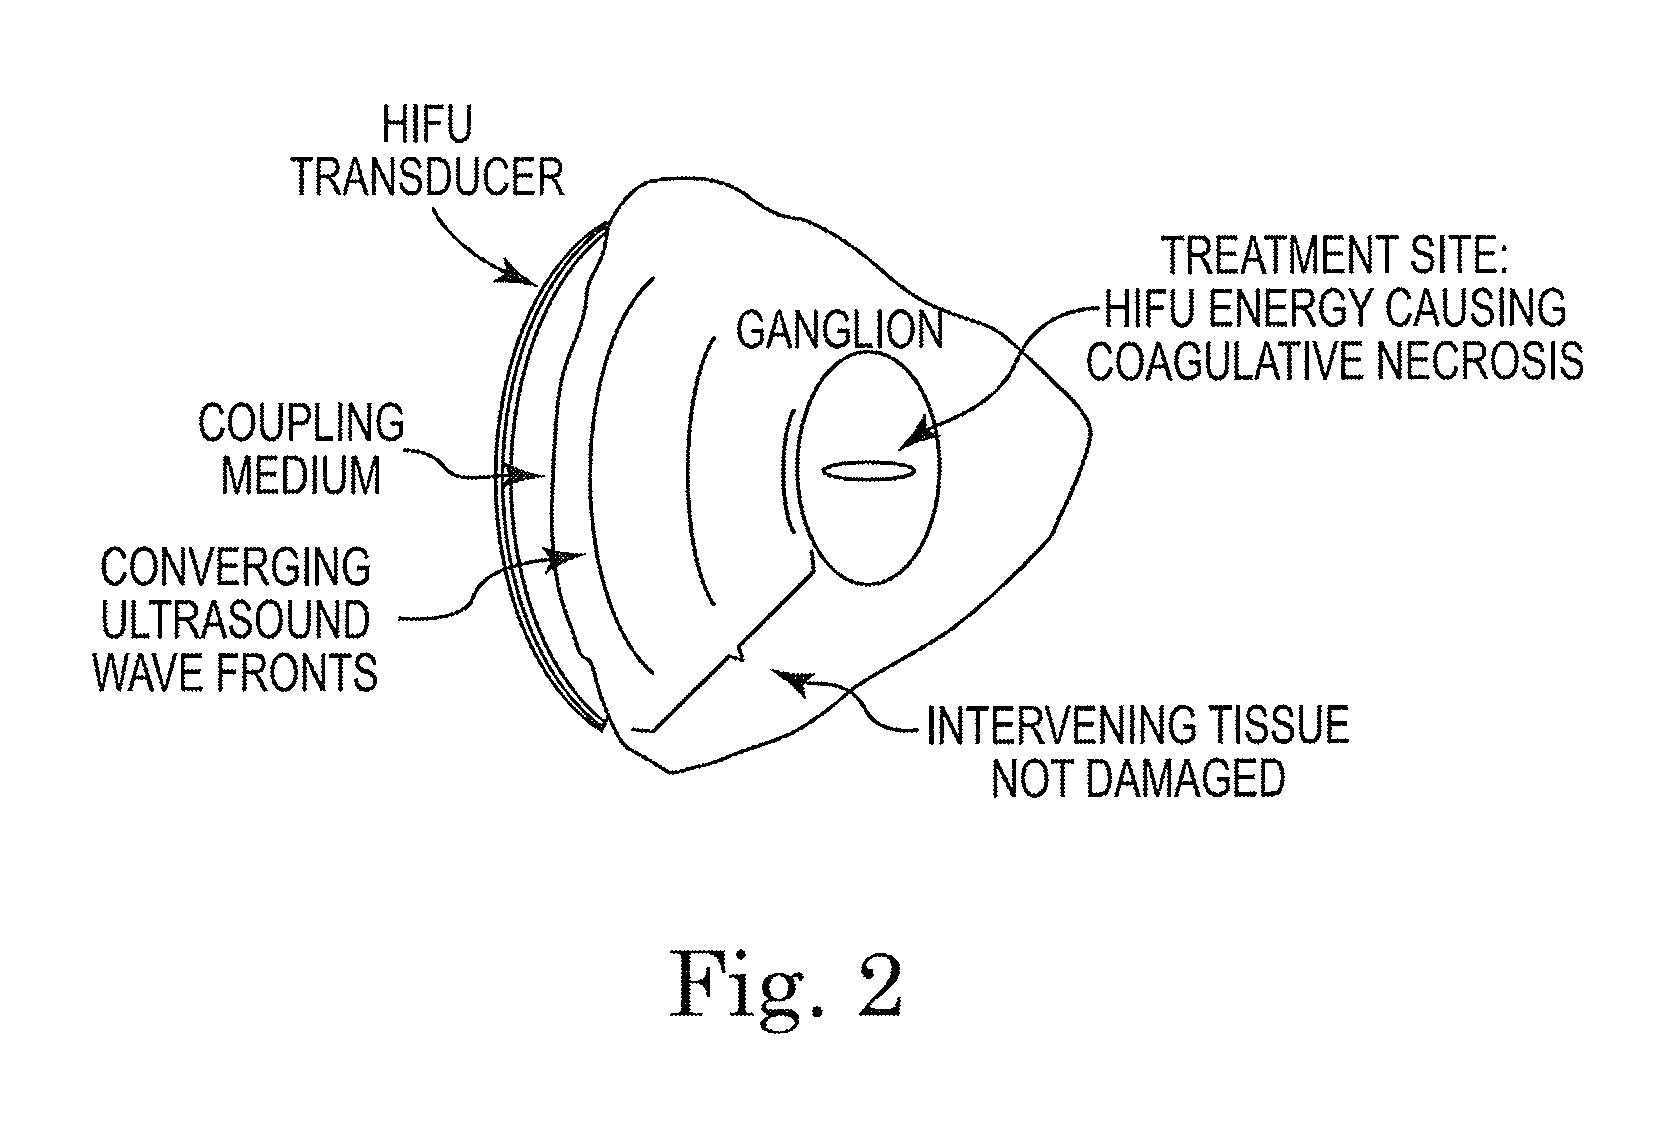 System and method of trans-abdominal pre-aortic ganglion ablation